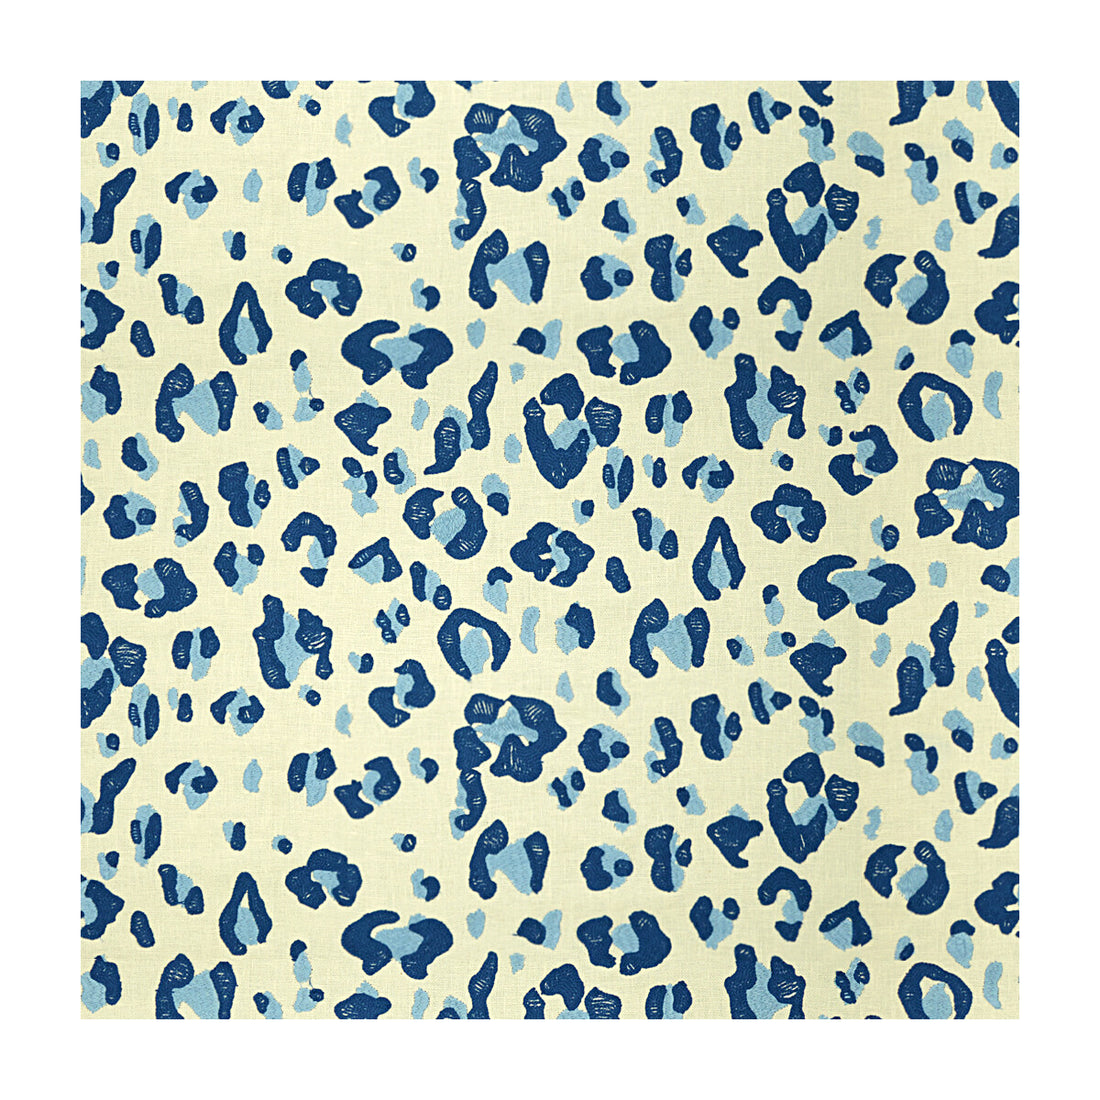 Tonga Leopard fabric in blue color - pattern 8015117.5.0 - by Brunschwig &amp; Fils in the Les Tropiques collection